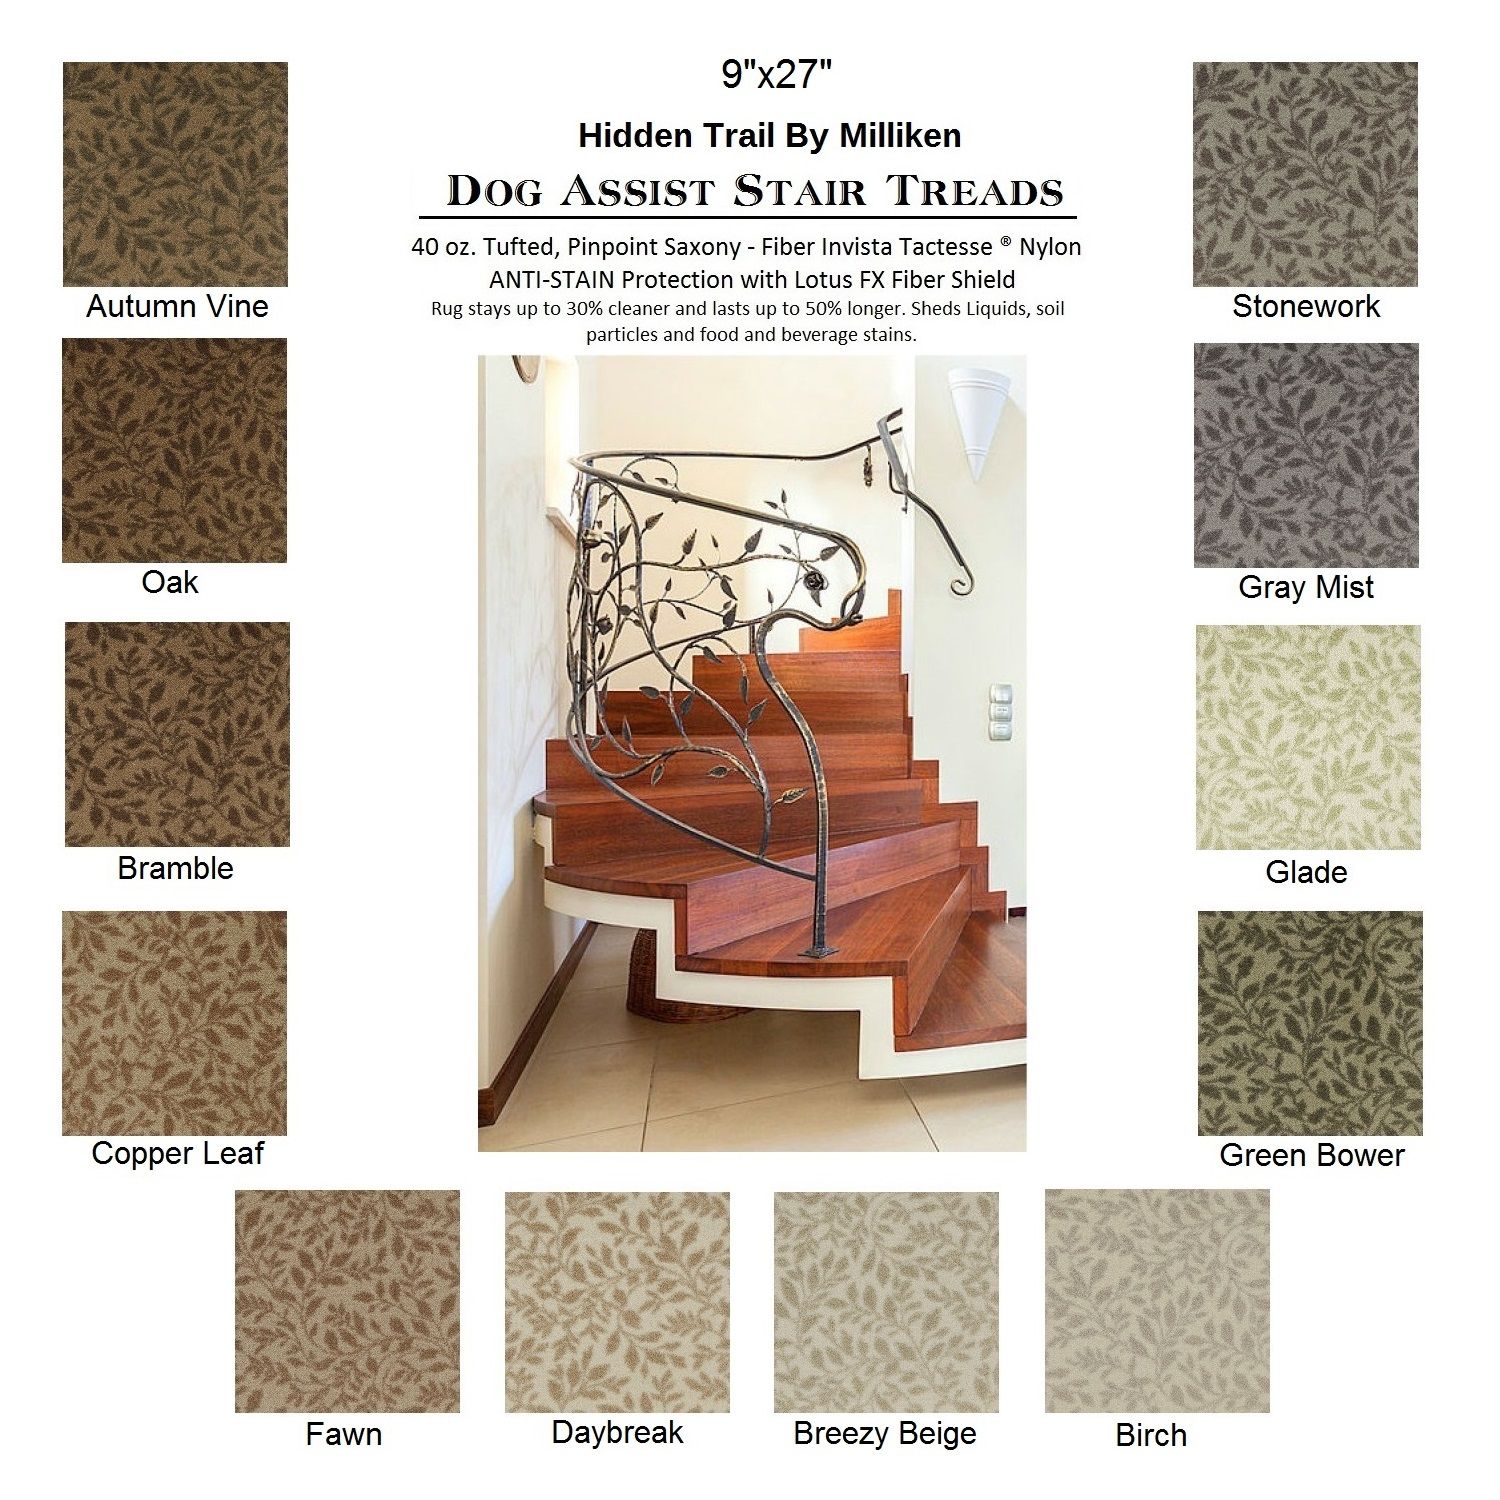 Trail Ii Dog Assist Carpet Stair Treads With Regard To Stair Tread Rugs For Dogs (View 11 of 20)